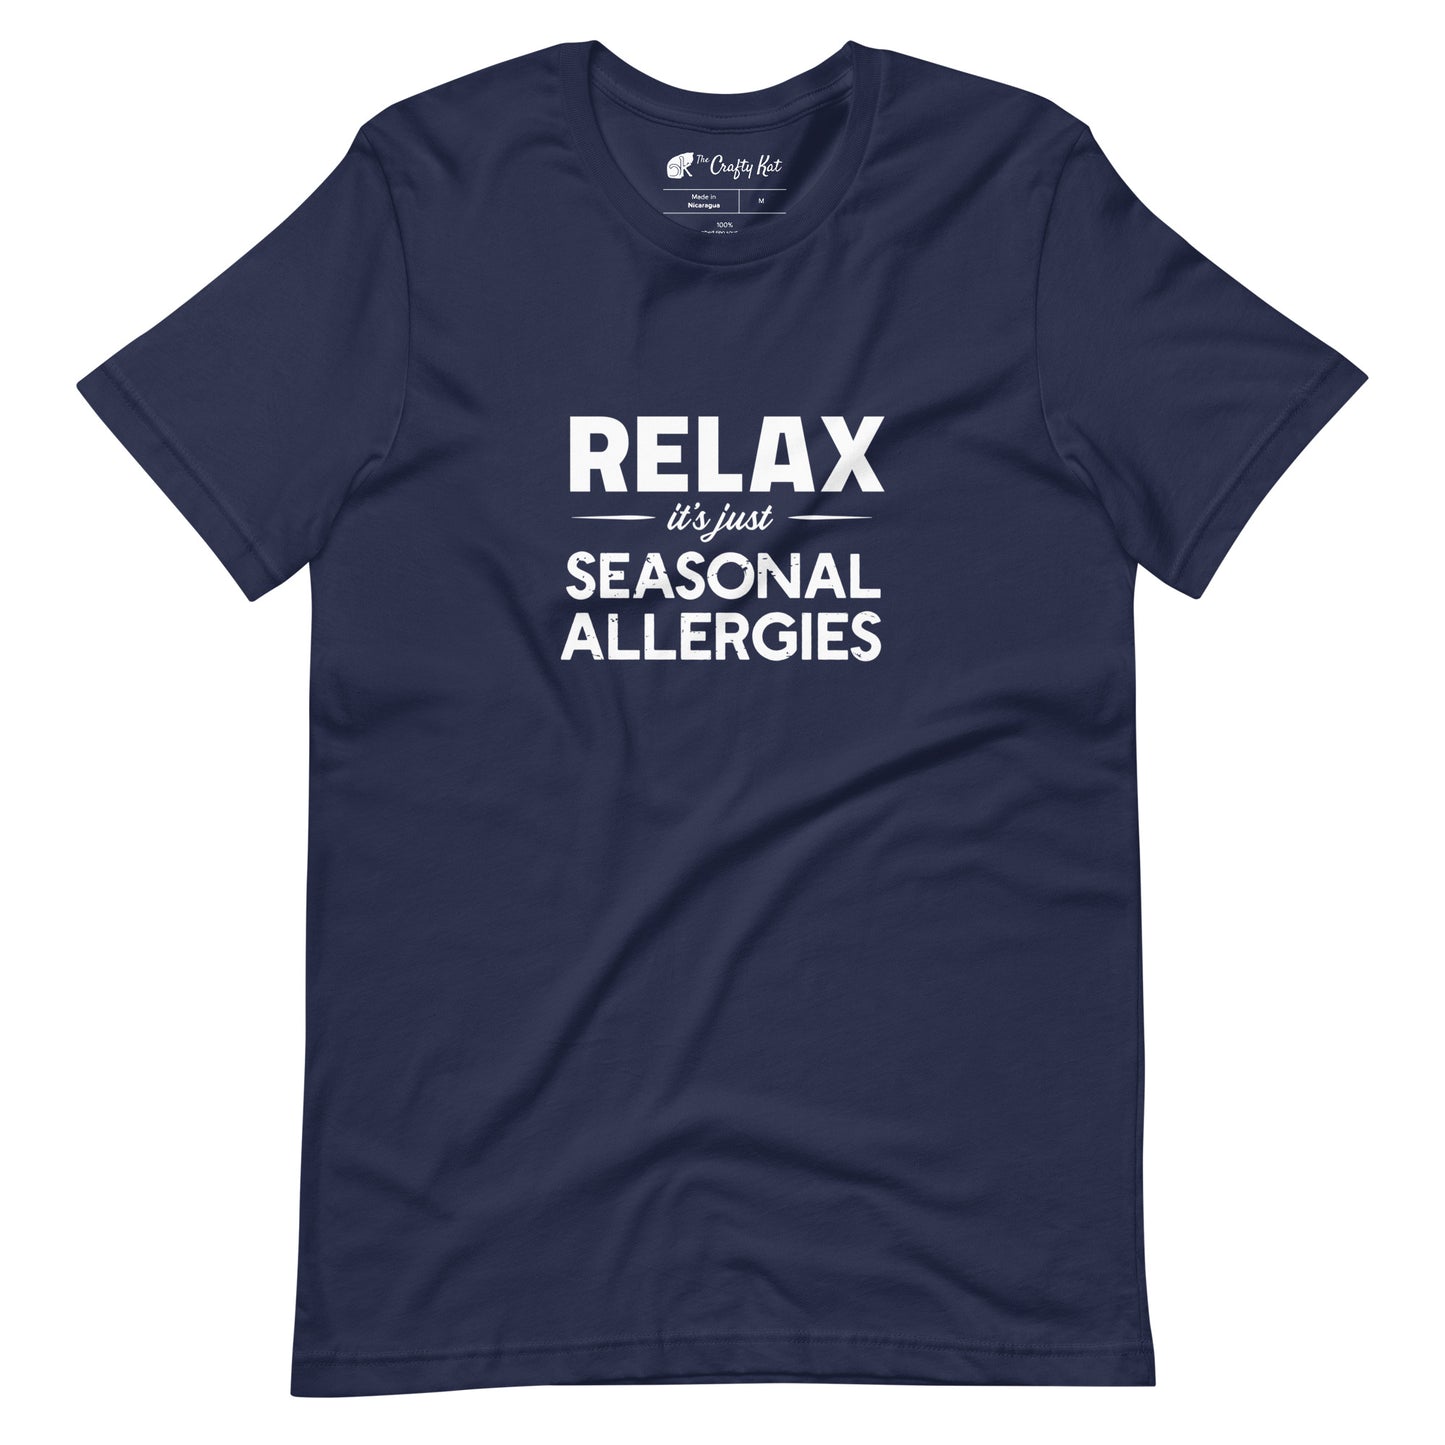 Navy t-shirt with white graphic: "RELAX it's just SEASONAL ALLERGIES"